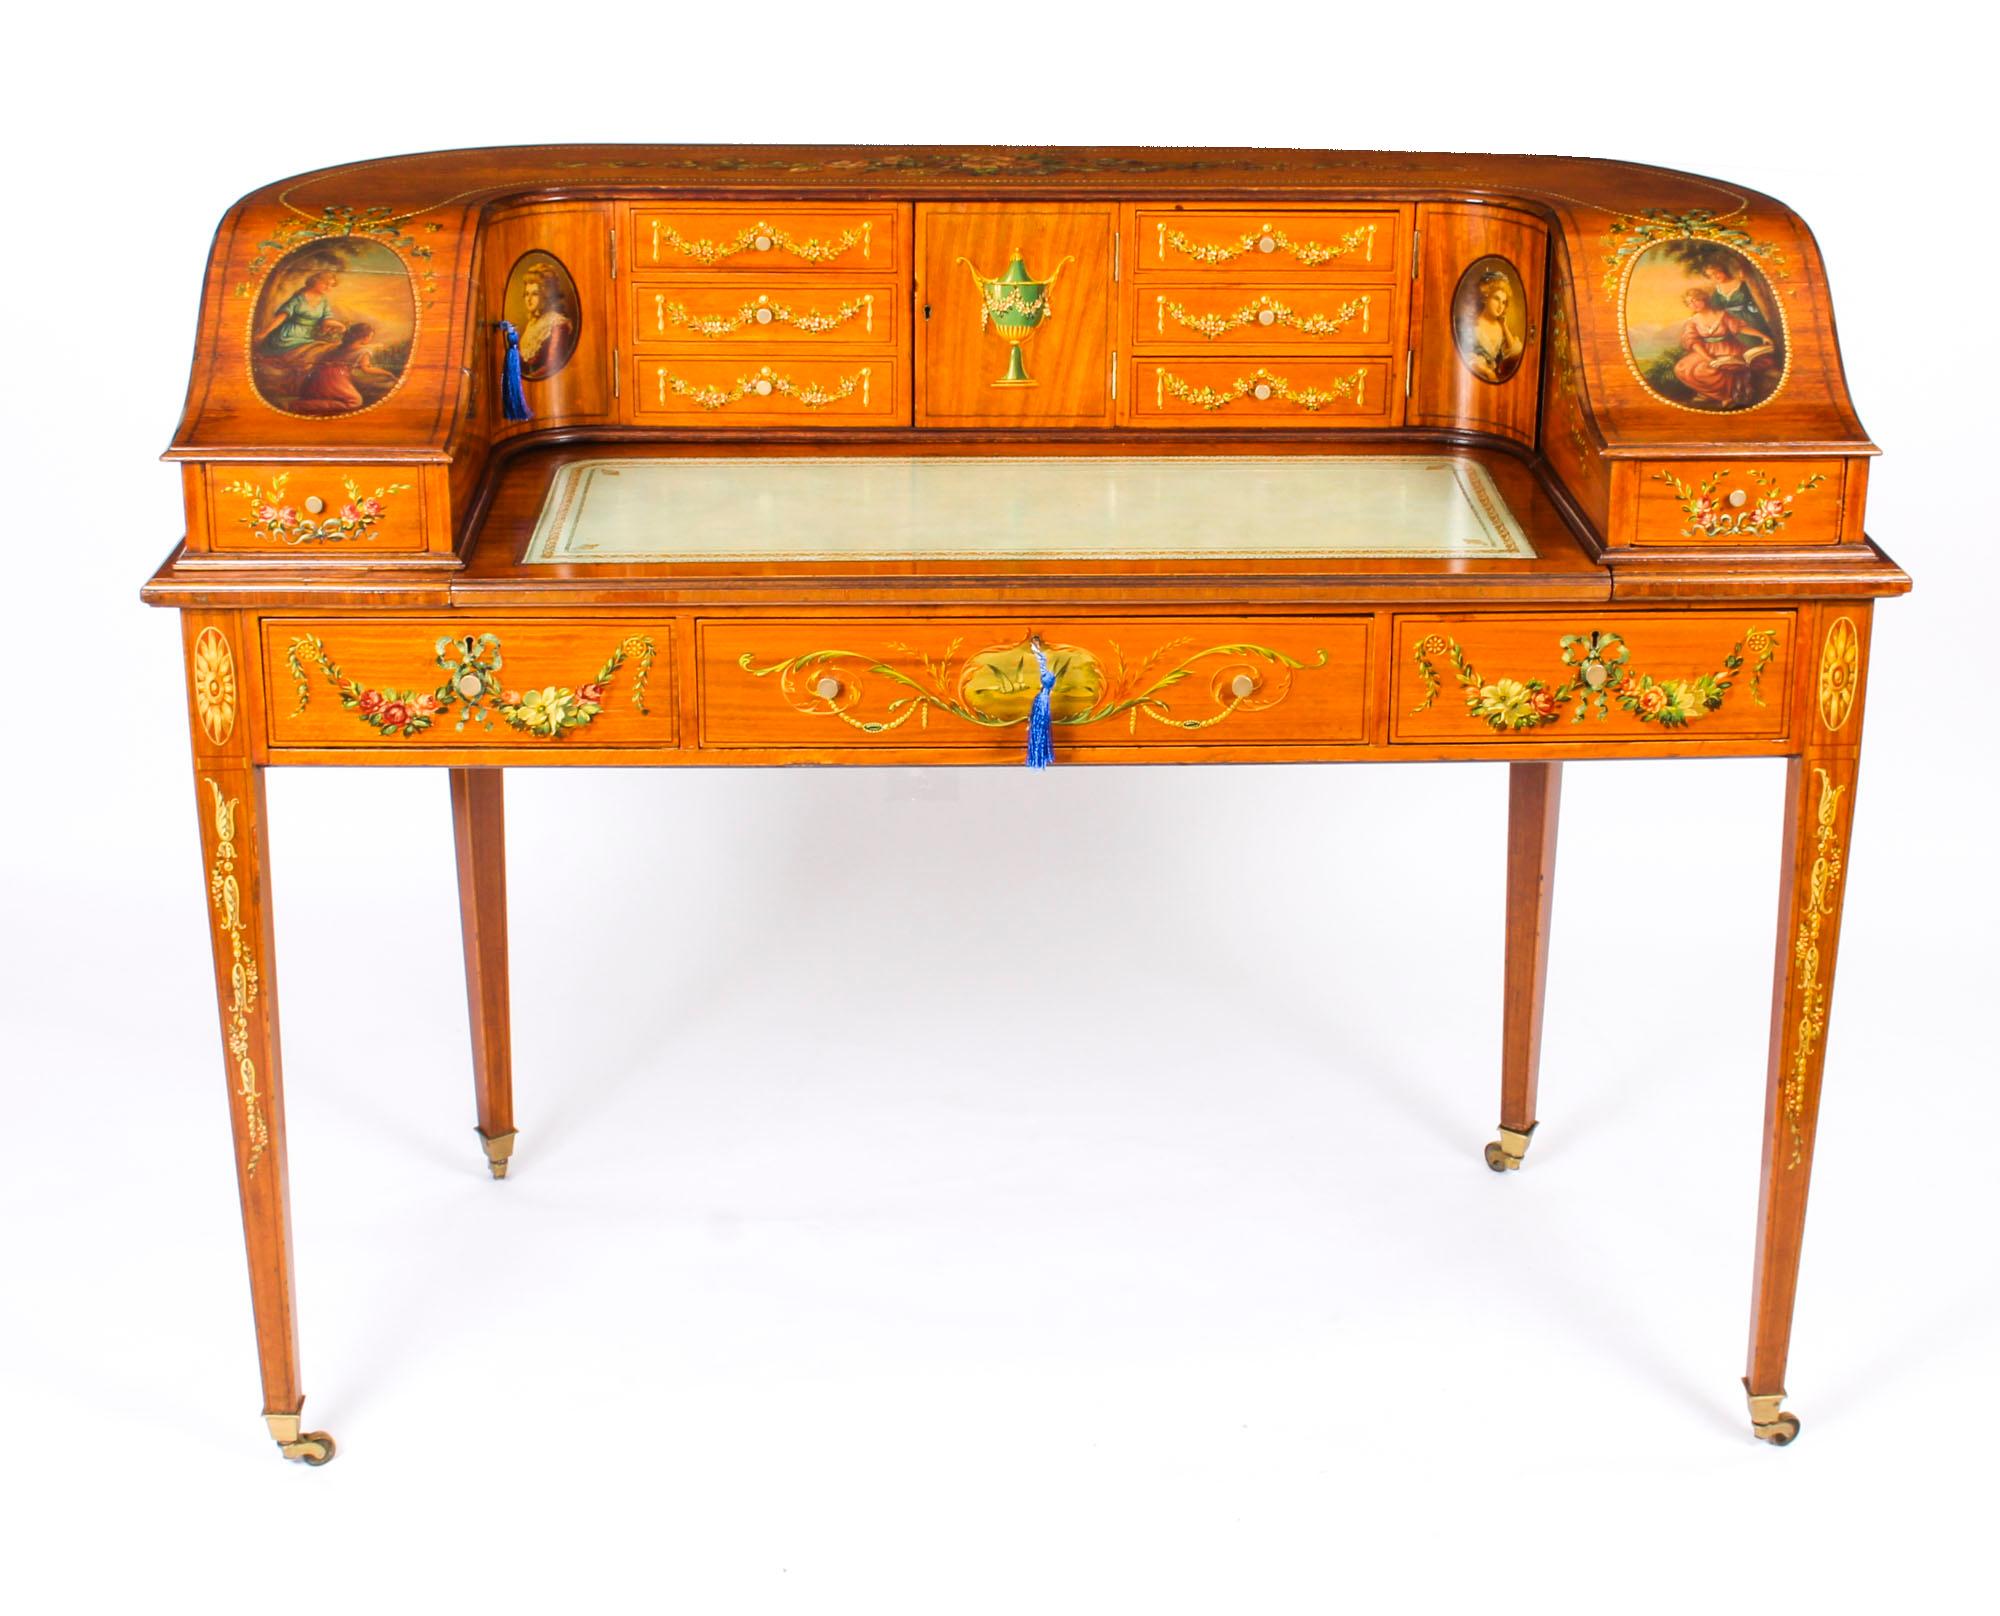 This is a truly exceptional antique Edwardian hand painted and inlaid satinwood Carlton House desk, circa 1900 in date.

This stunning desk is made from the finest satinwood, and it is superbly finished all round with spectacular hand painted floral